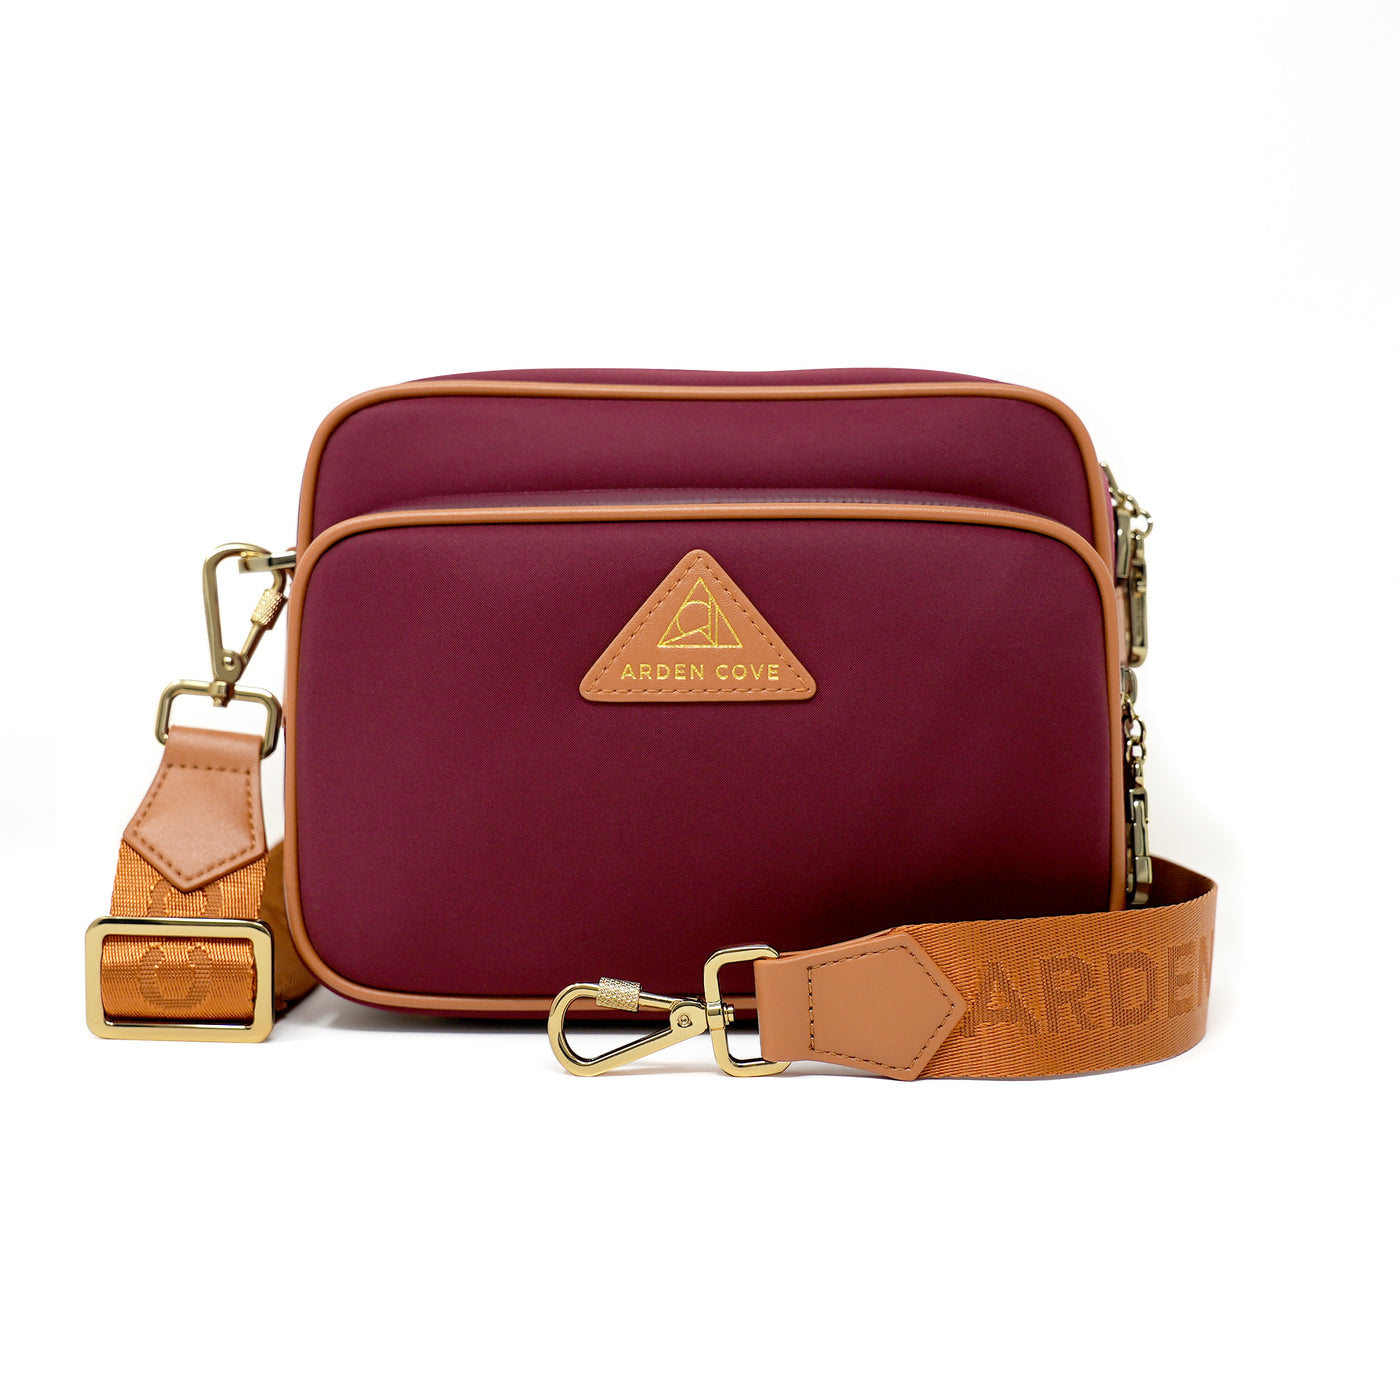 Anti-theft Water-resistant Travel Crossbody - Crissy Full Crossbody in Red Gold with nylon jacquard & locking clasps straps - front view - Arden Cove